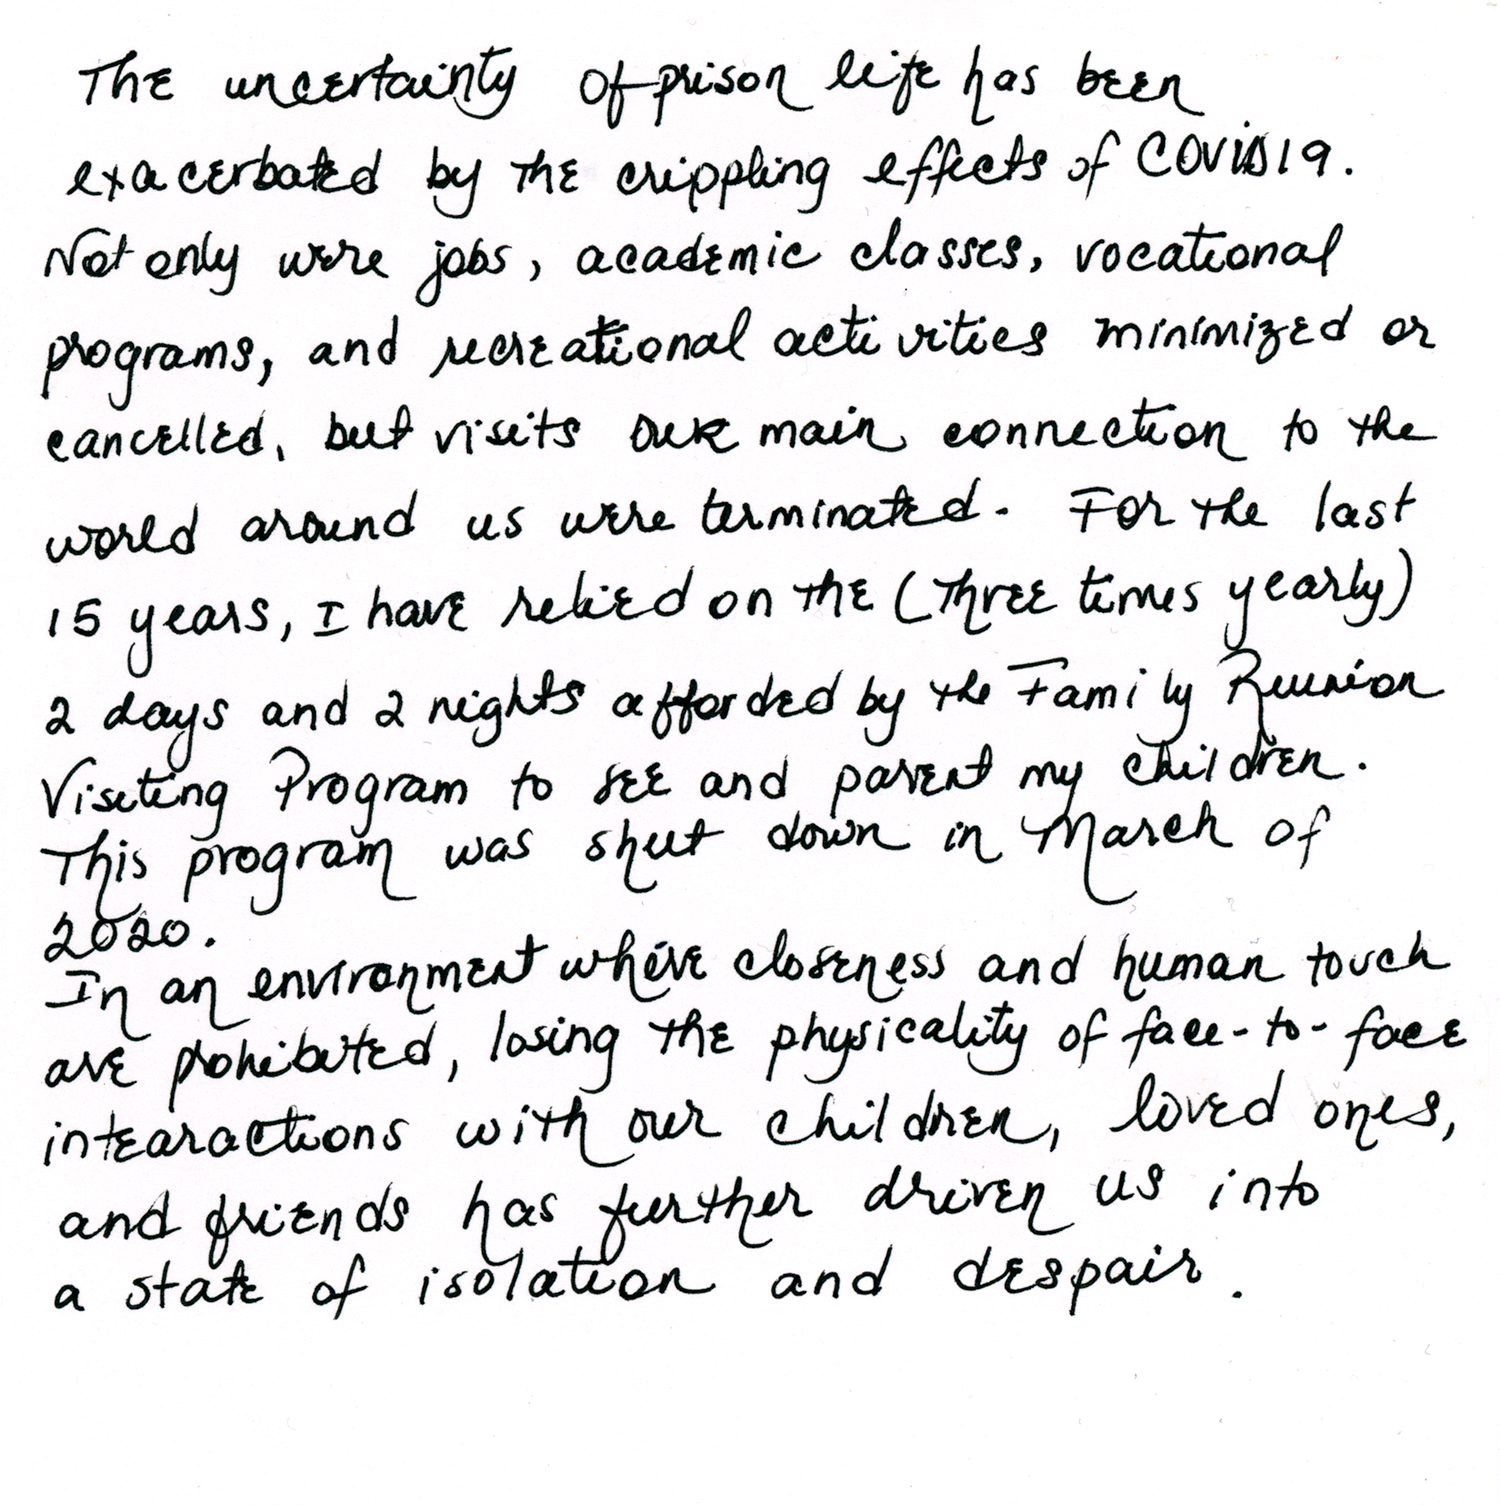 A handwritten note from Assia: “The uncertainty of prison life has been exacerbated by the crippling effects of COVID 19. Not only were jobs, academic classes, vocational programs, and recreational activities minimized or cancelled, but visits—our main connection to the world around us — were terminated. For the last 15 years, I have relied on the four-times-a year 2 days and 2 nights afforded by the Family Reunion Visiting Program to see and parent my children. This program was shut down in March of 2020. In an environment where closeness and human touch are prohibited, losing the physicality of face-to-face interactions with our children, loved ones, and friends has further driven us into a state of isolation and despair.”